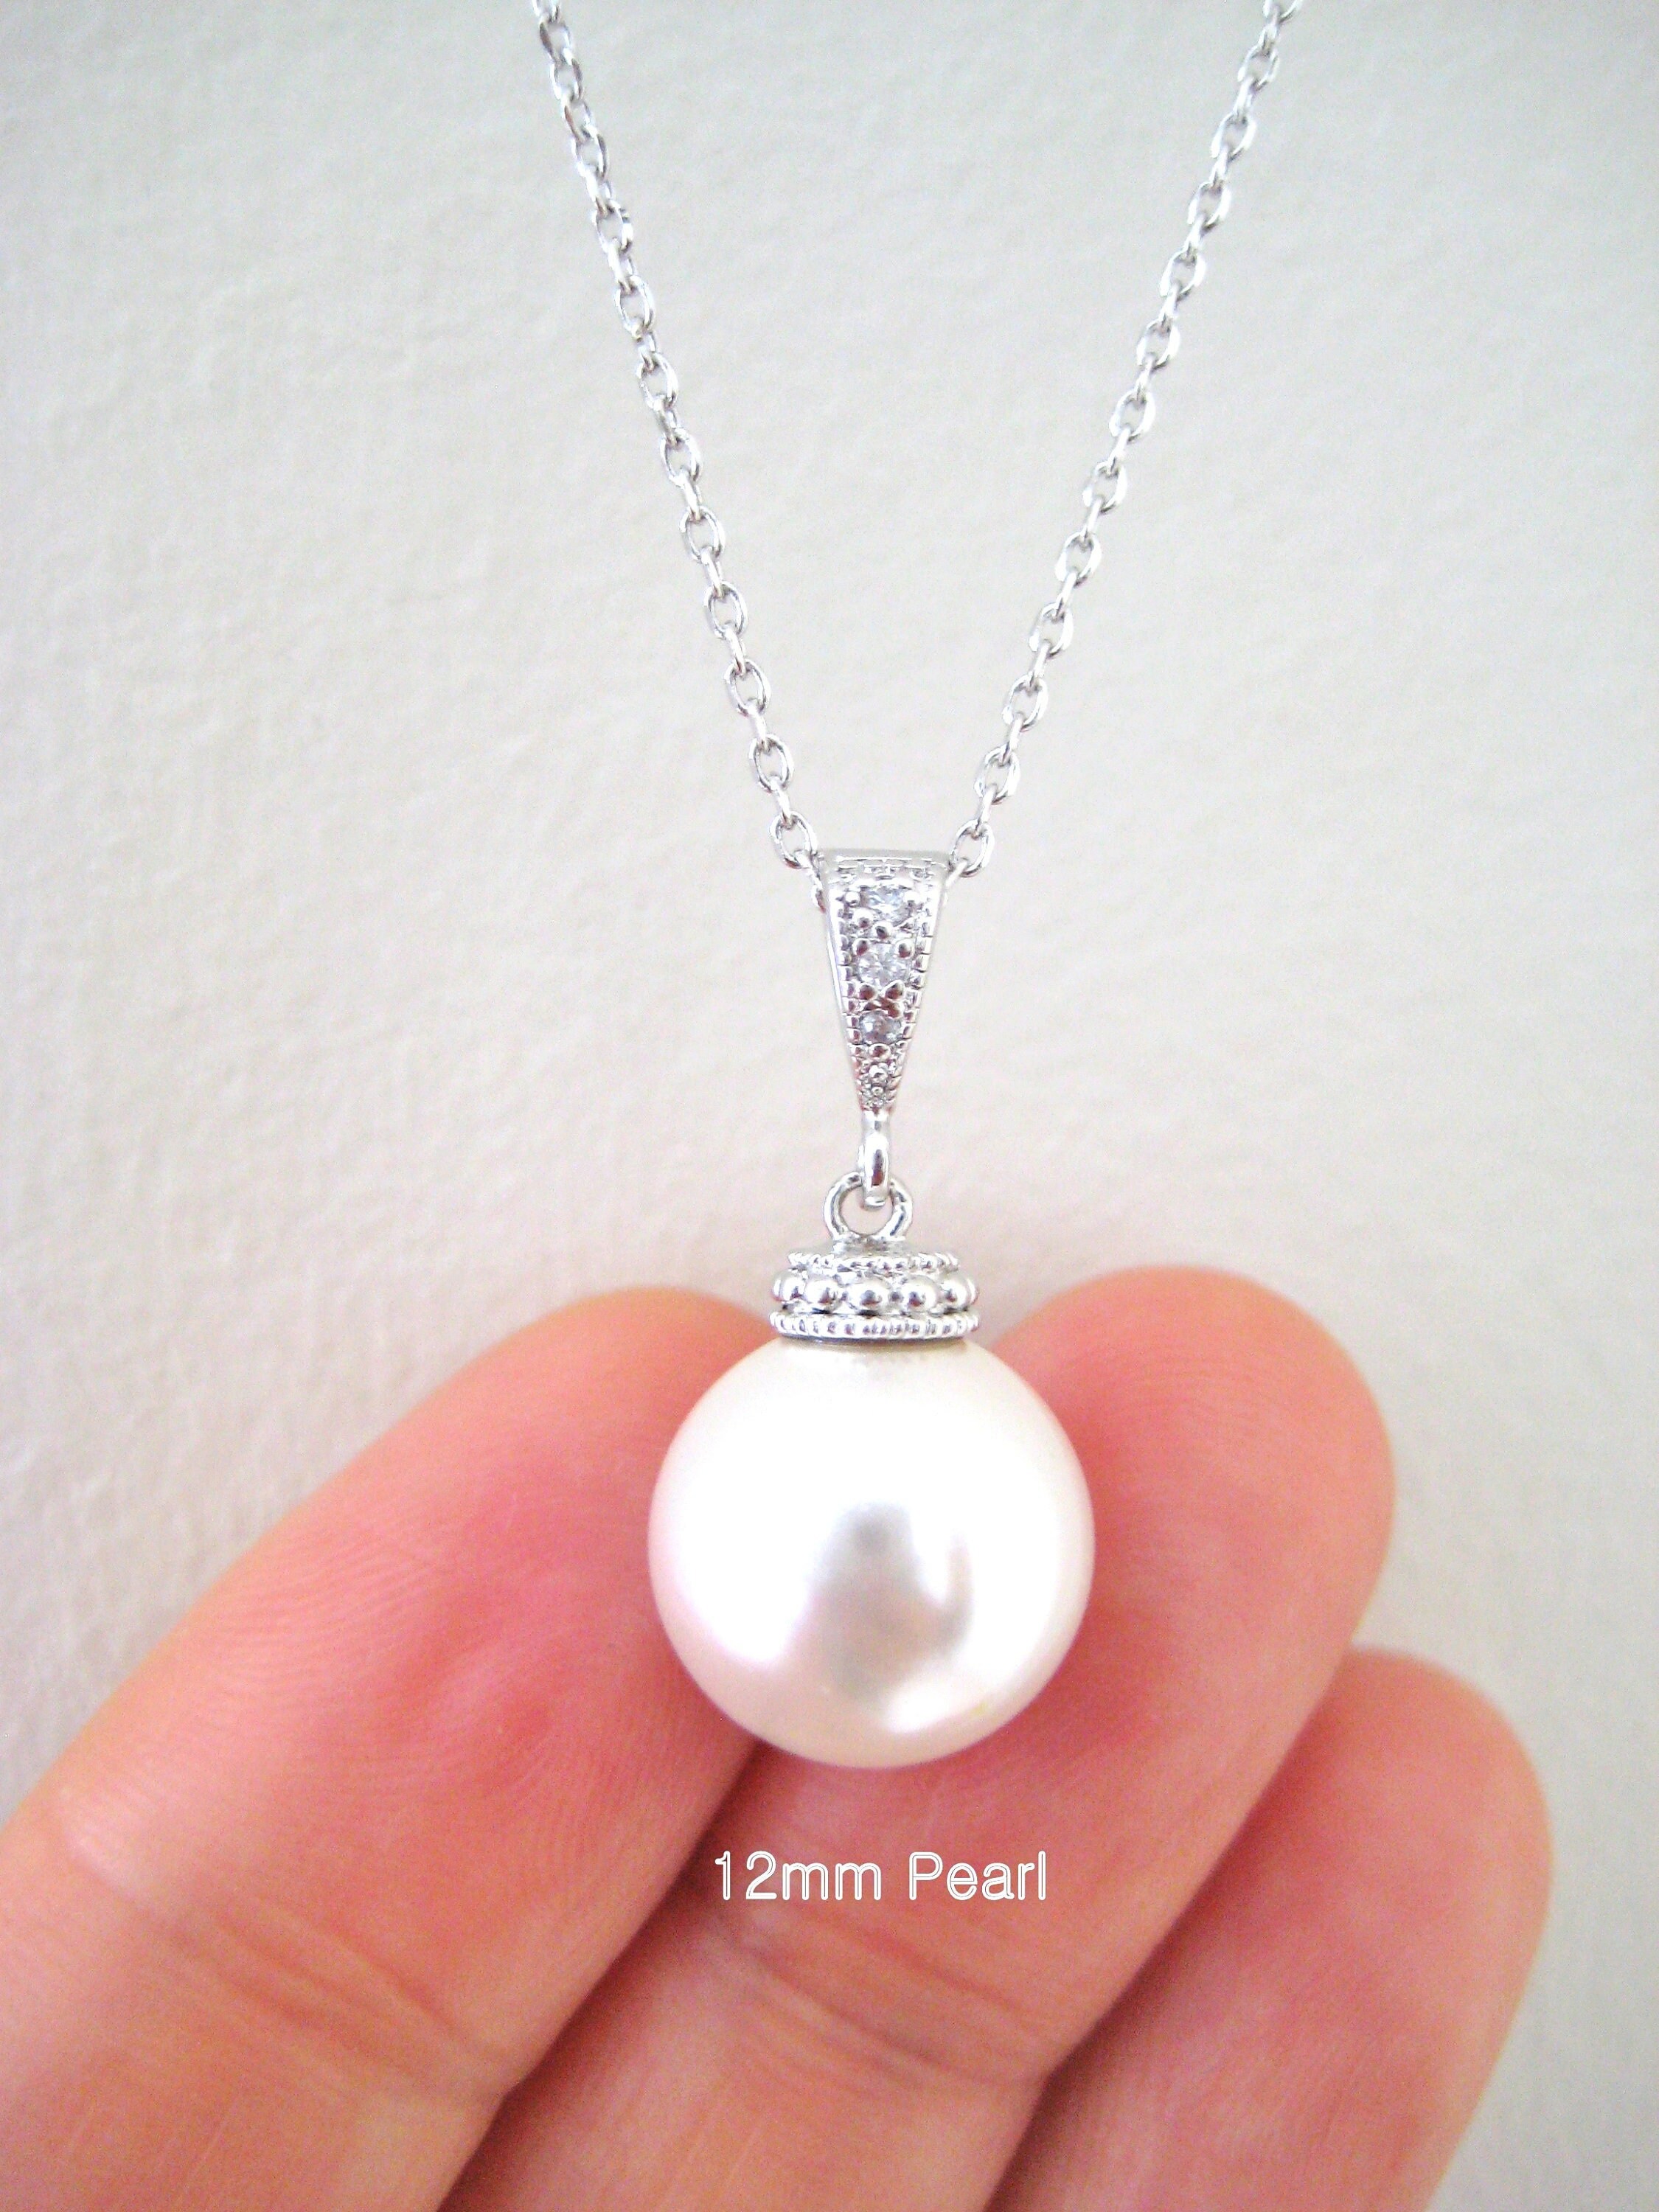 11-12mm AA+ Baroque Pearl Necklace with Magnetic Clasp